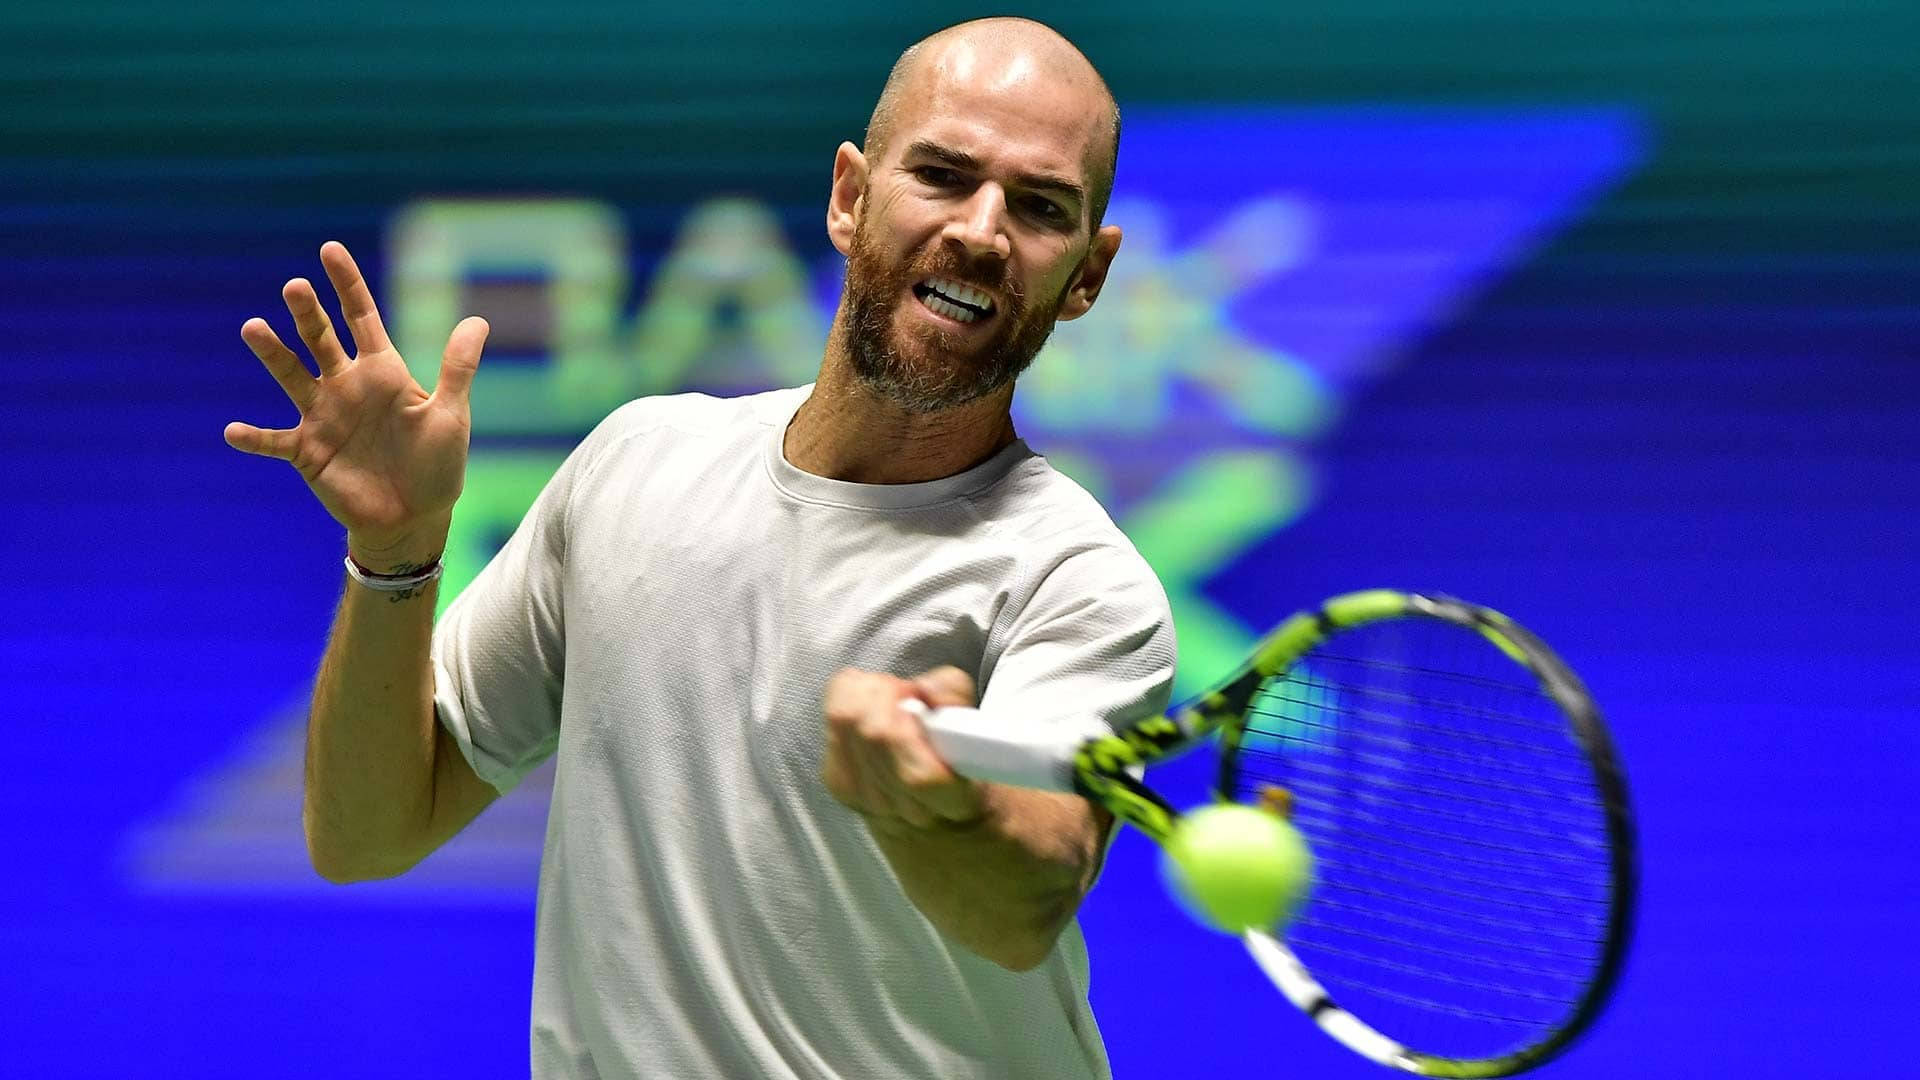 A Man Is Playing Tennis On A Stage Wallpaper